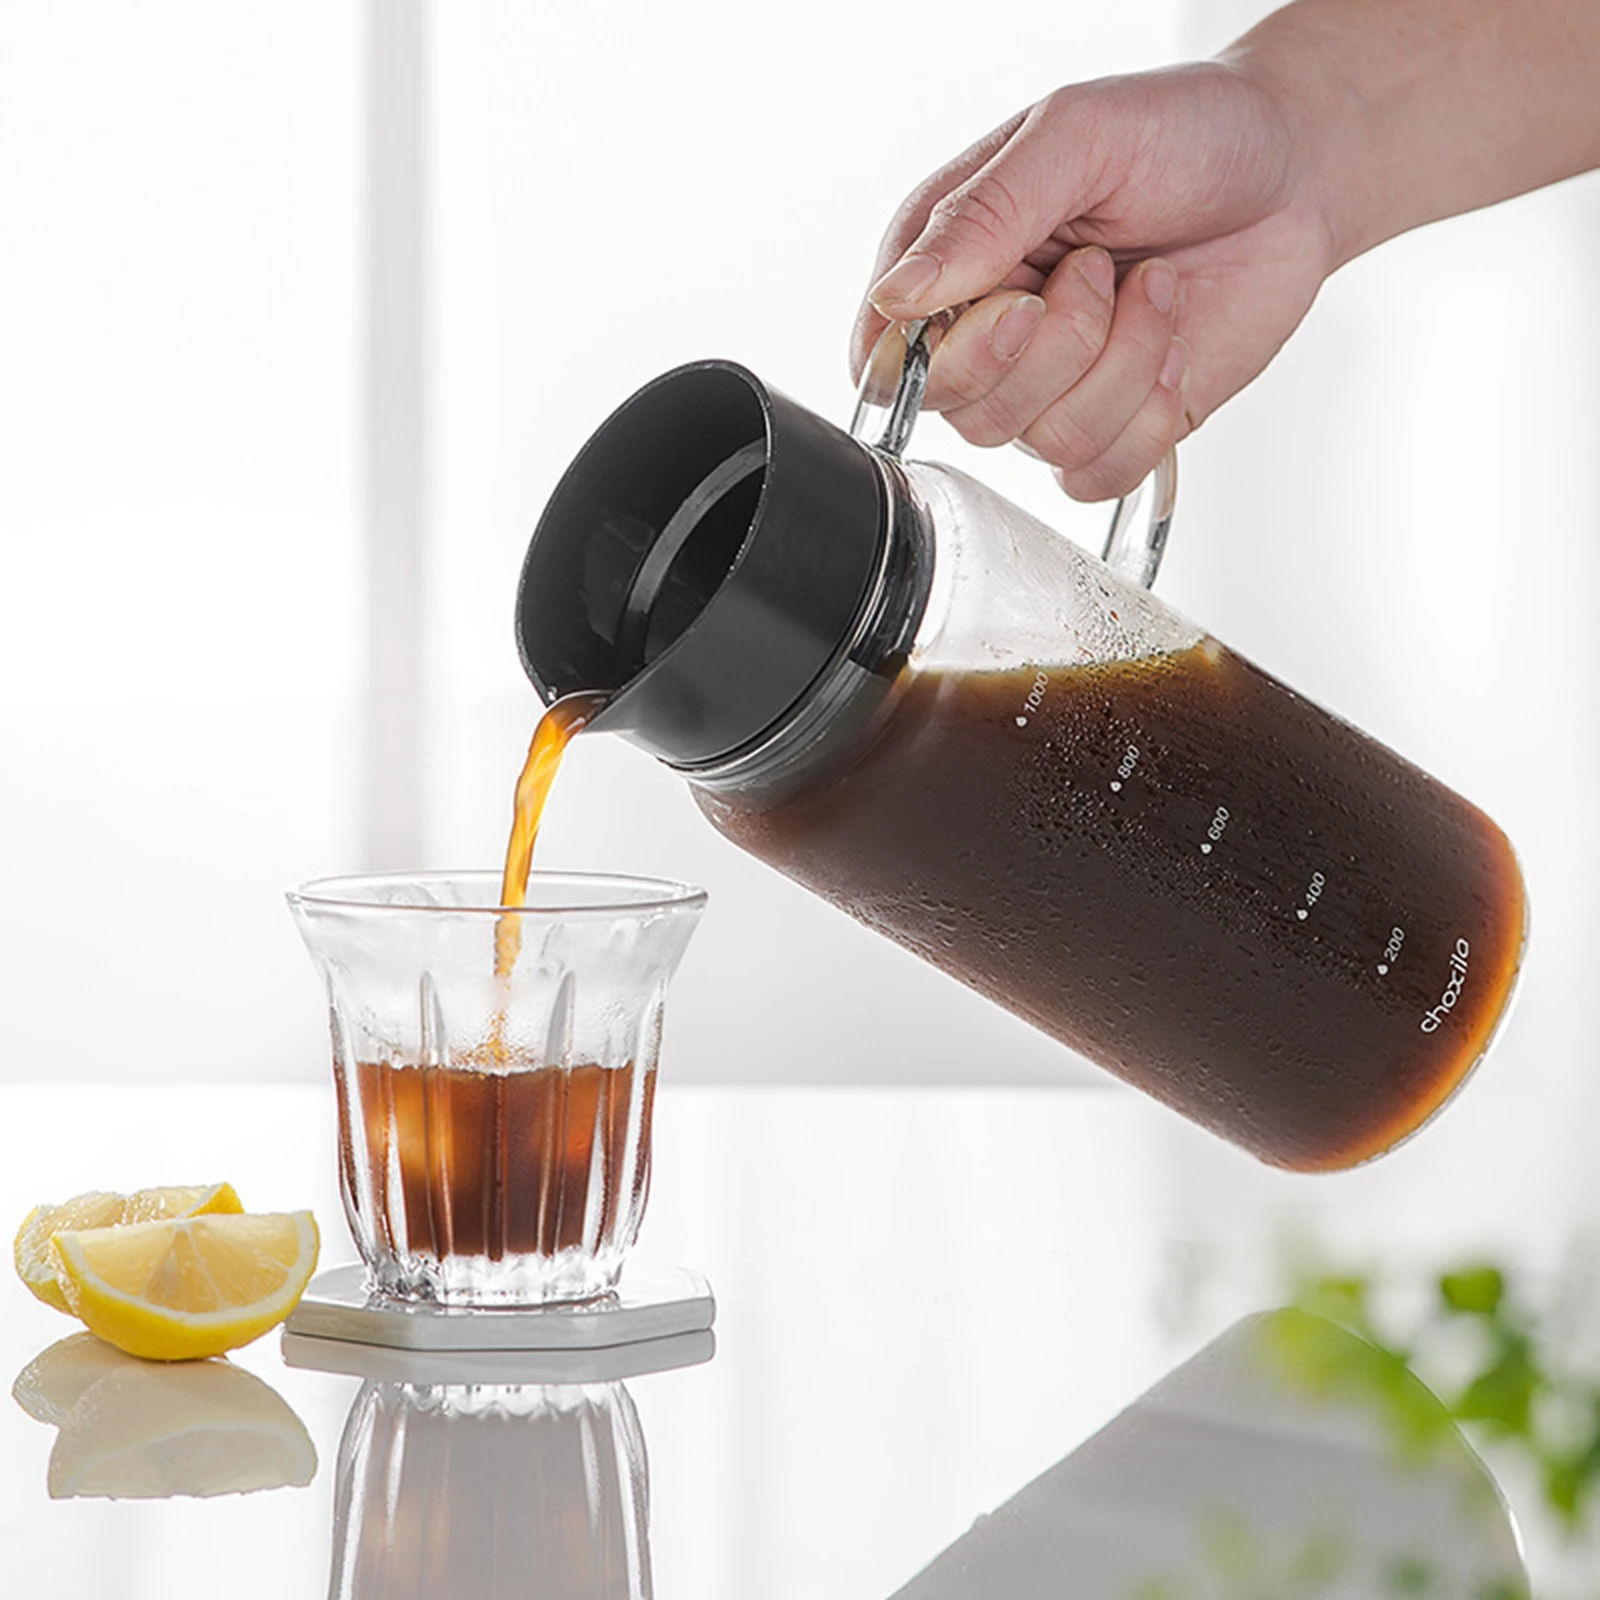 https://ae01.alicdn.com/kf/S3d13f068638648acb45af2bc92be5d3aD/Cold-Brew-Maker-Cold-Brew-Iced-Coffee-Maker-Leakproof-for-Fridge-Coffee-Maker-Pitcher-with-Airtight.jpg